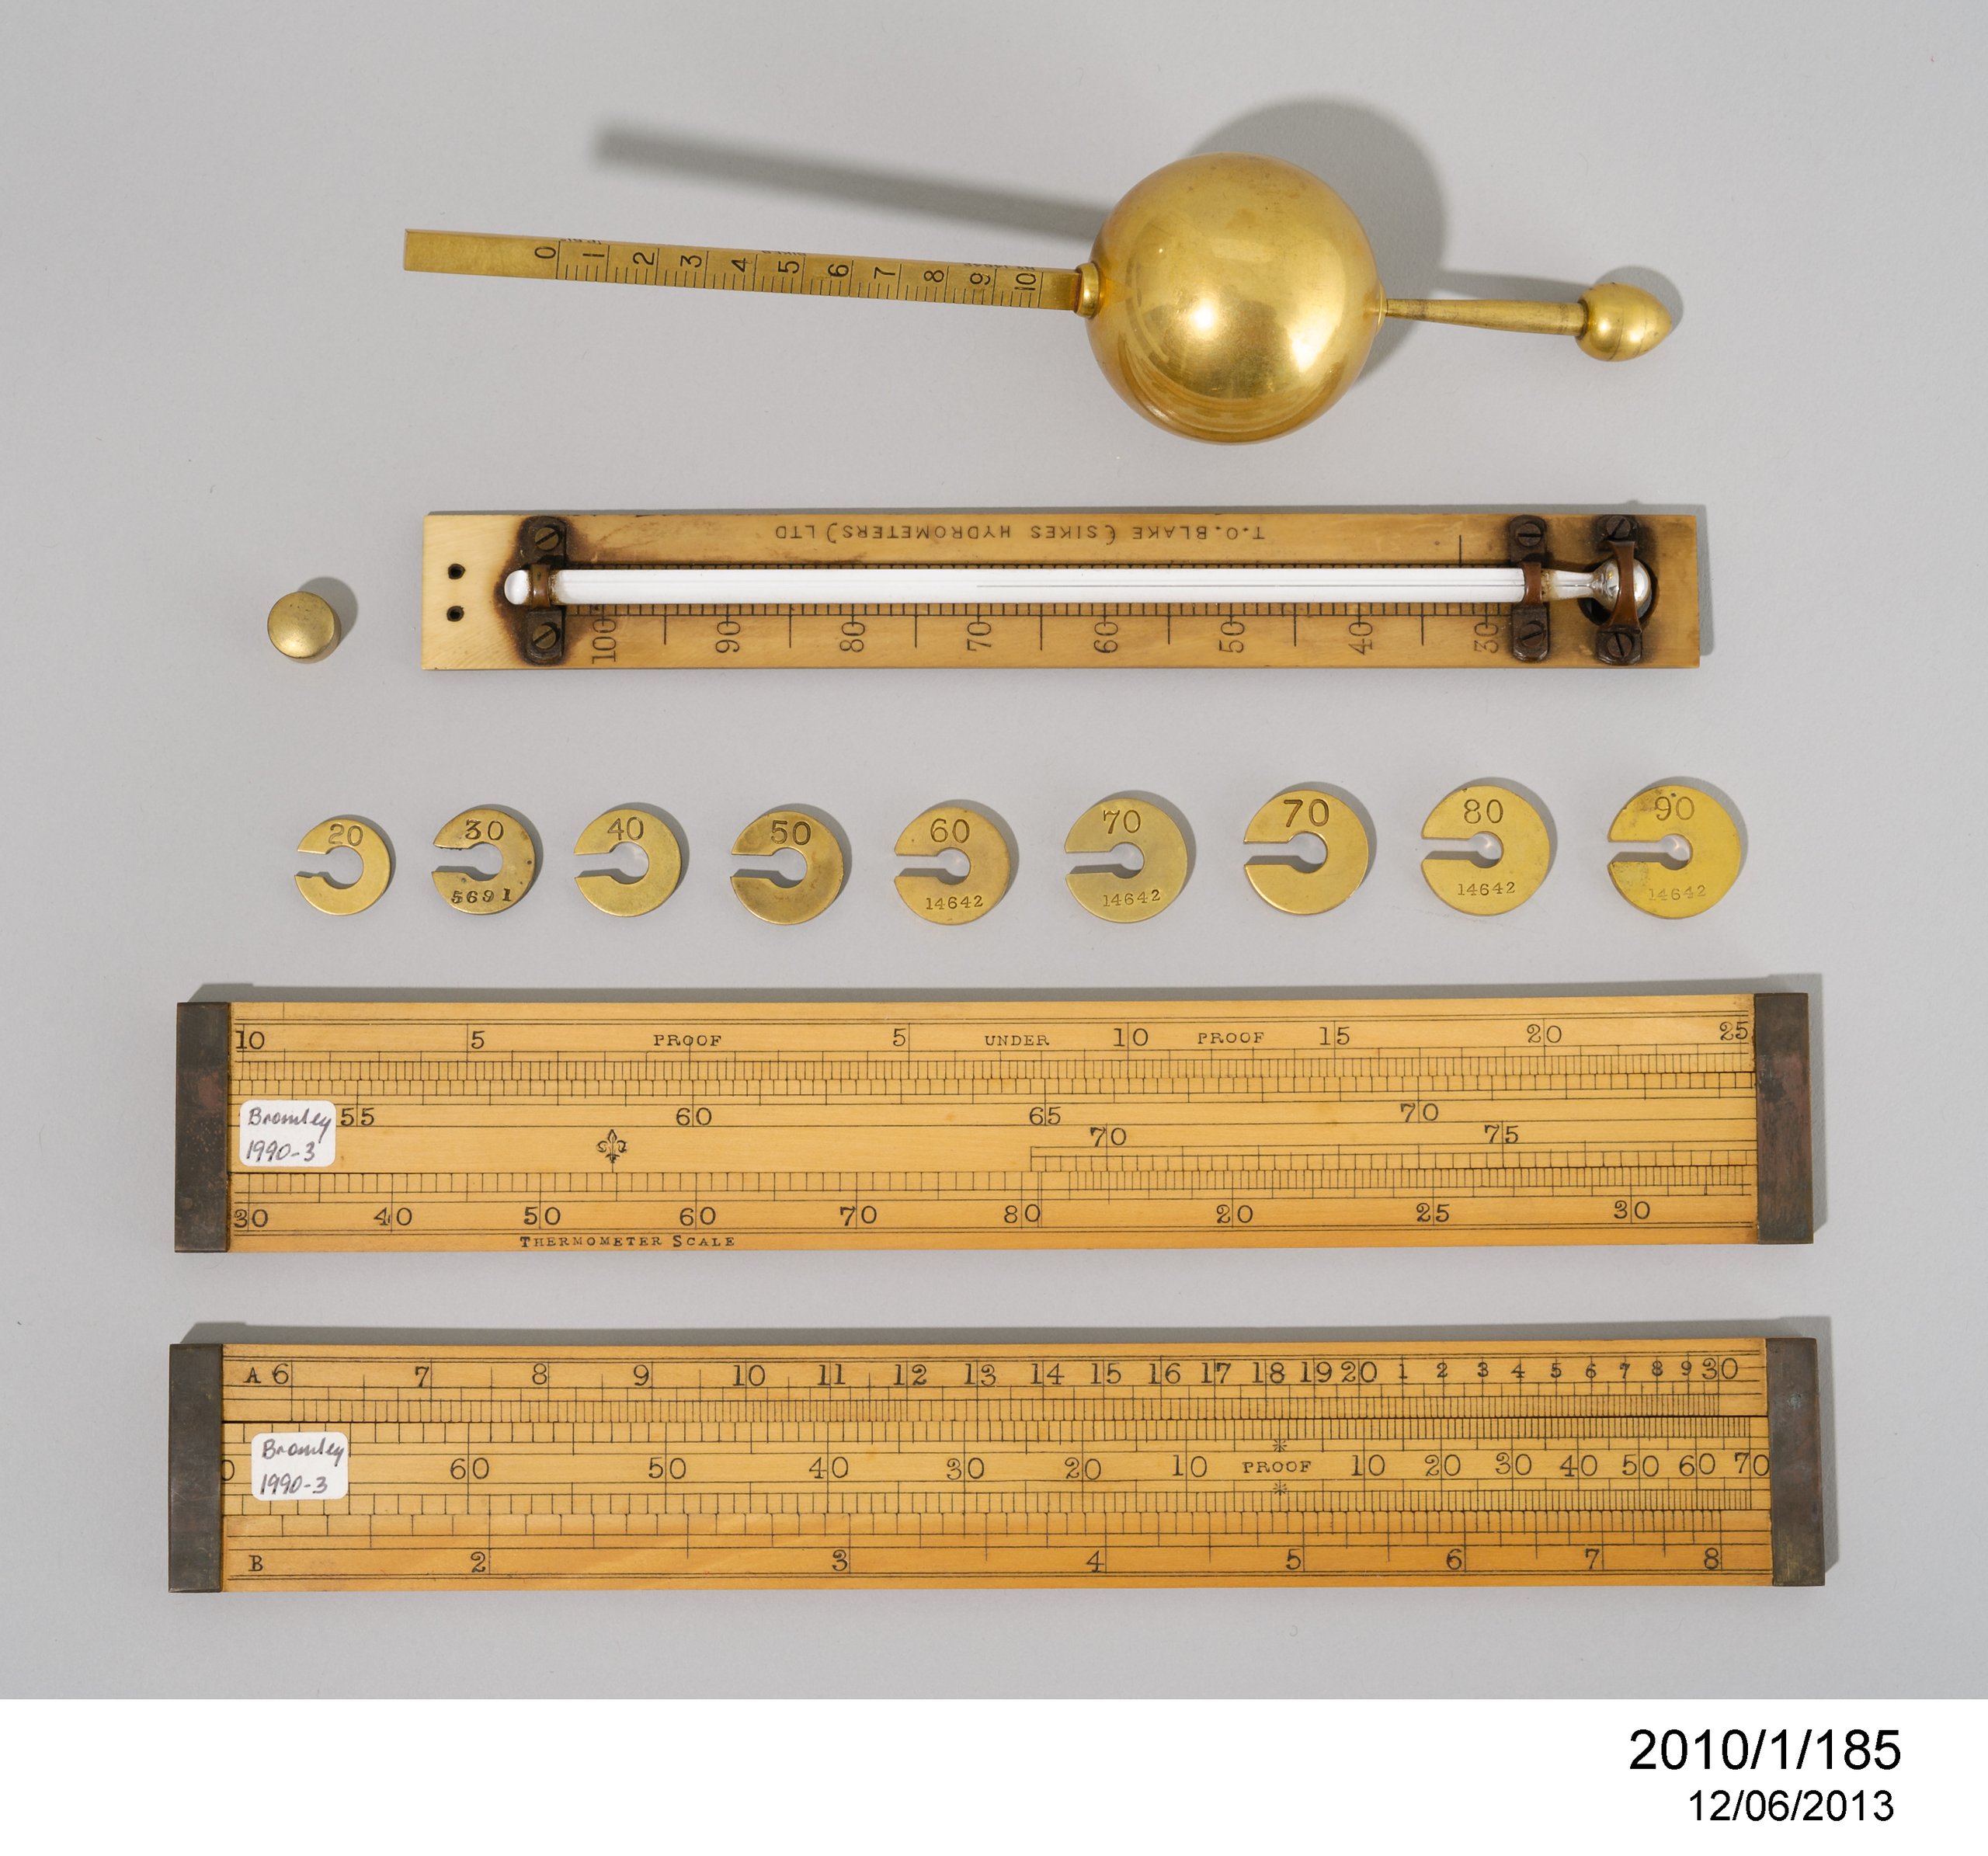 Sikes hydrometer for measuring density of liquids